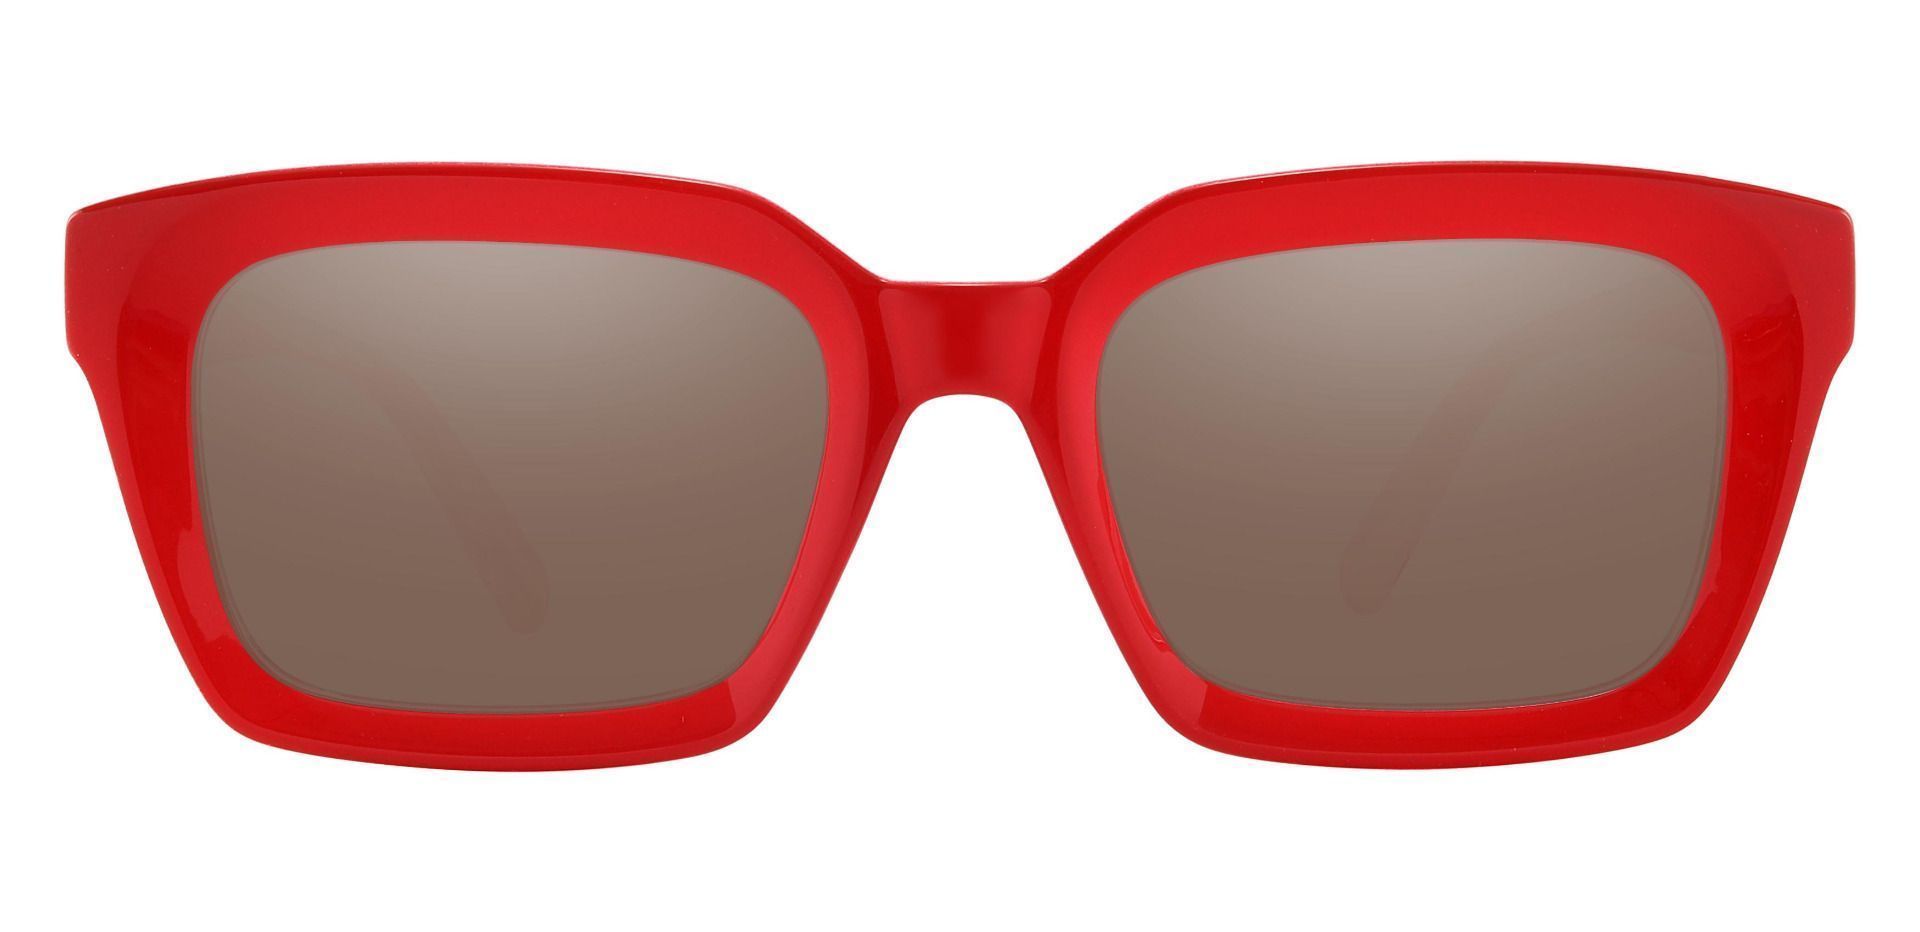 Unity Rectangle Lined Bifocal Sunglasses - Red Frame With Brown Lenses